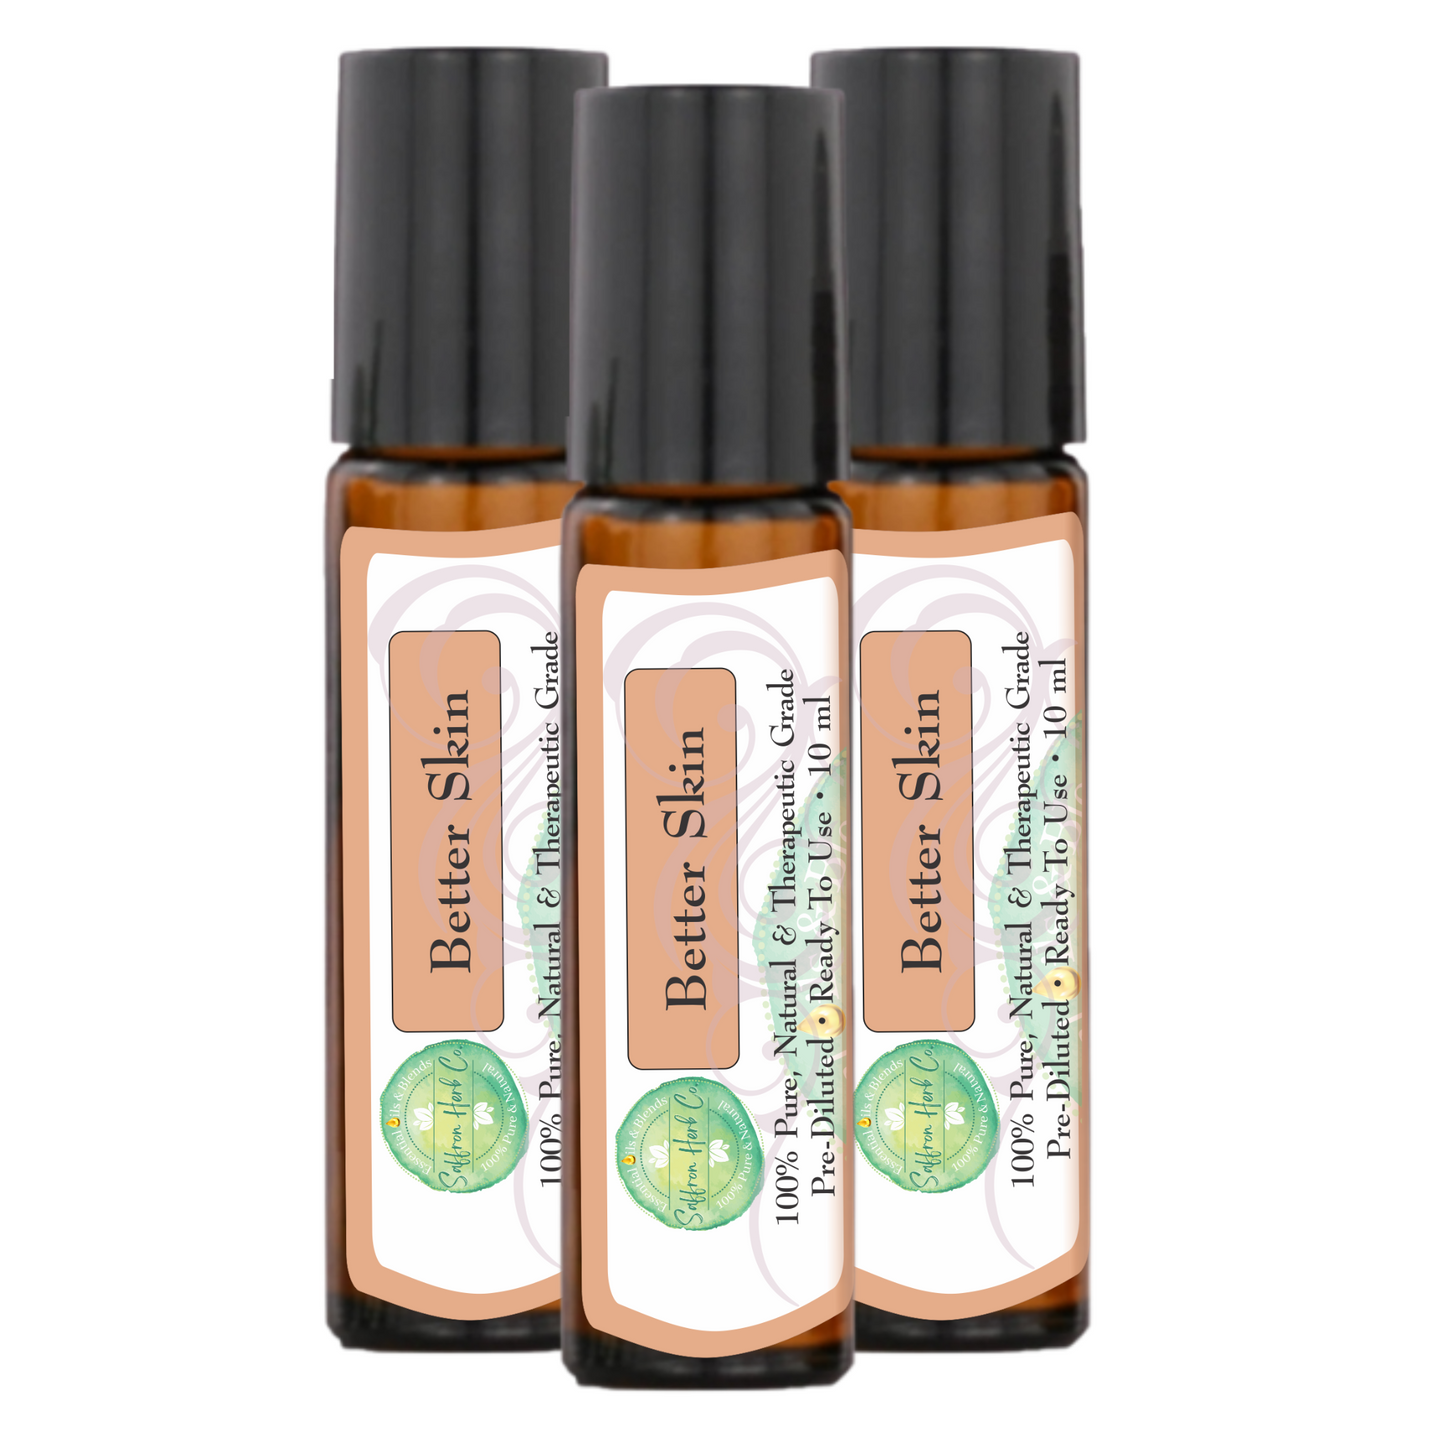 Better Skin™ Essential Oil Roller Bottle Blend • 100% Pure & Natural • Pre-Diluted • Ready To Use